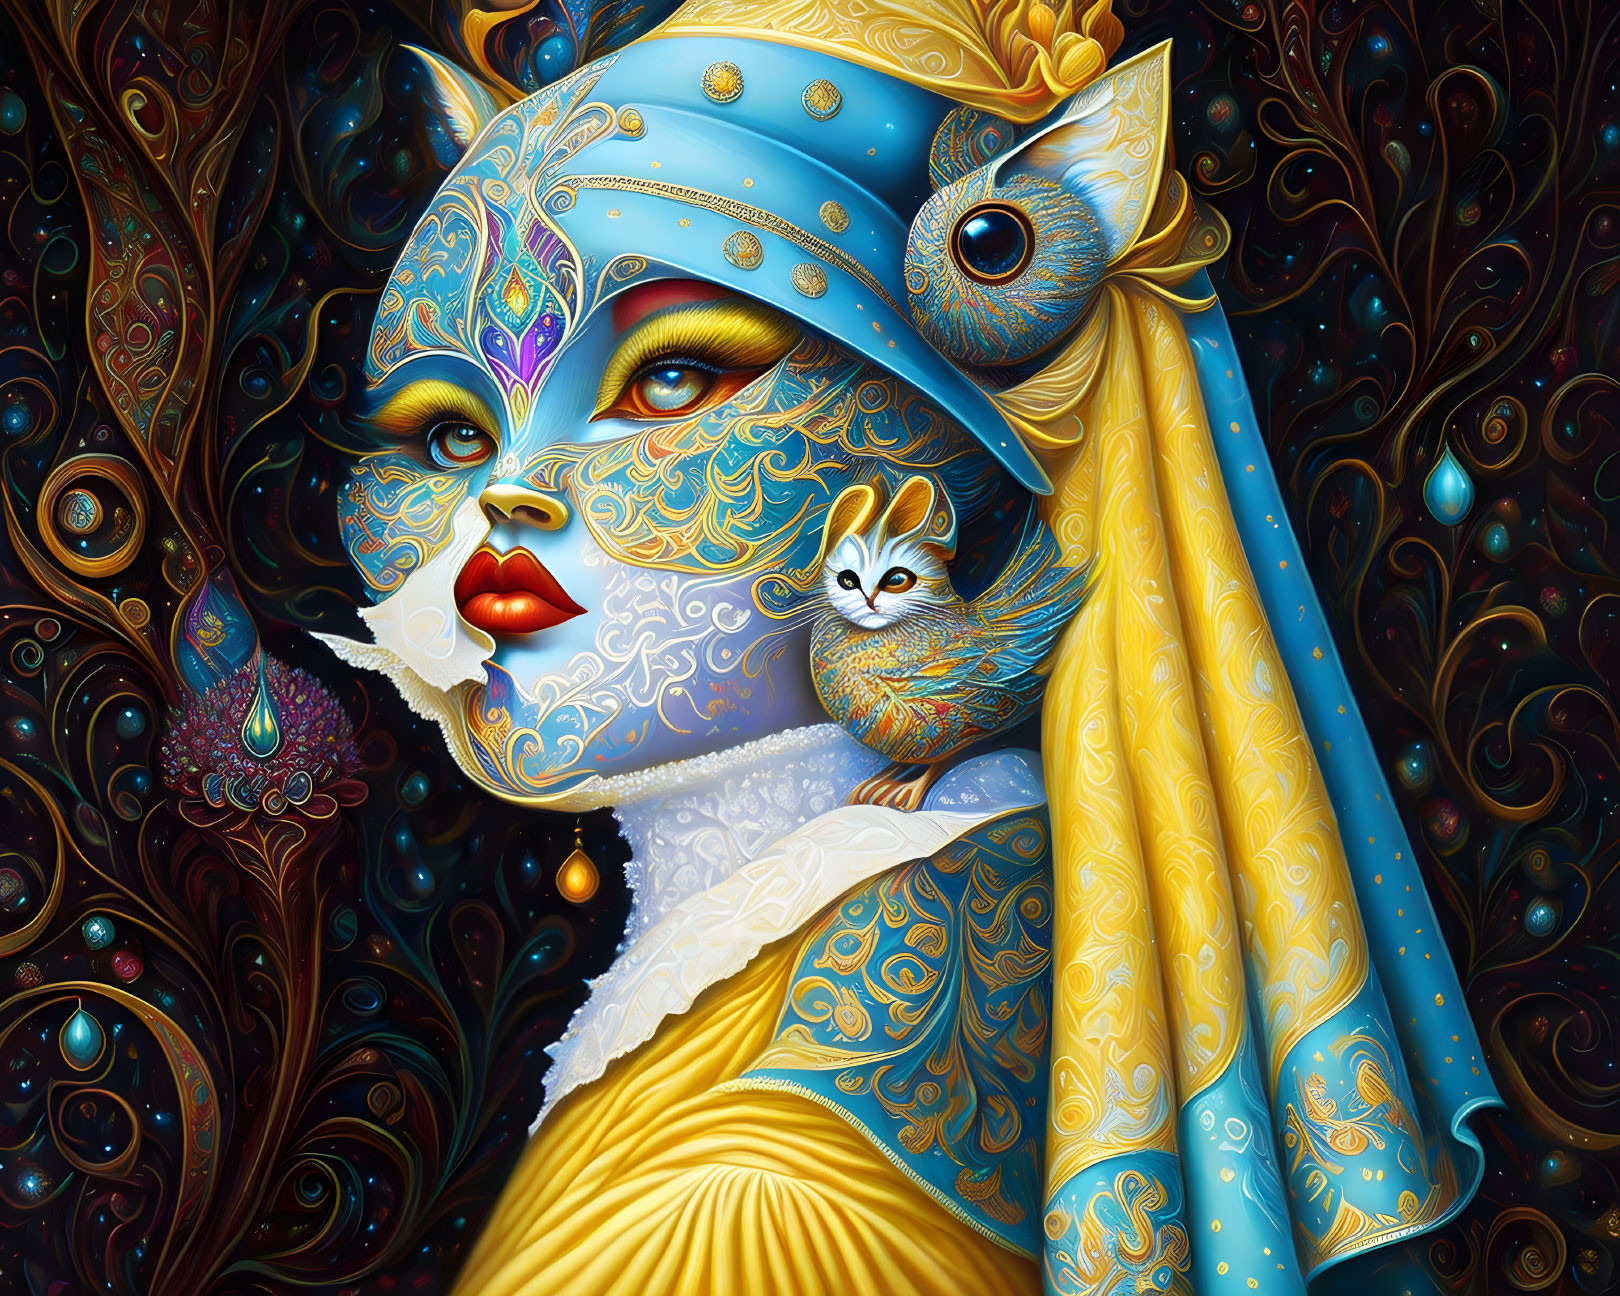 Digital artwork of woman with cat-like features and owl in cosmic background